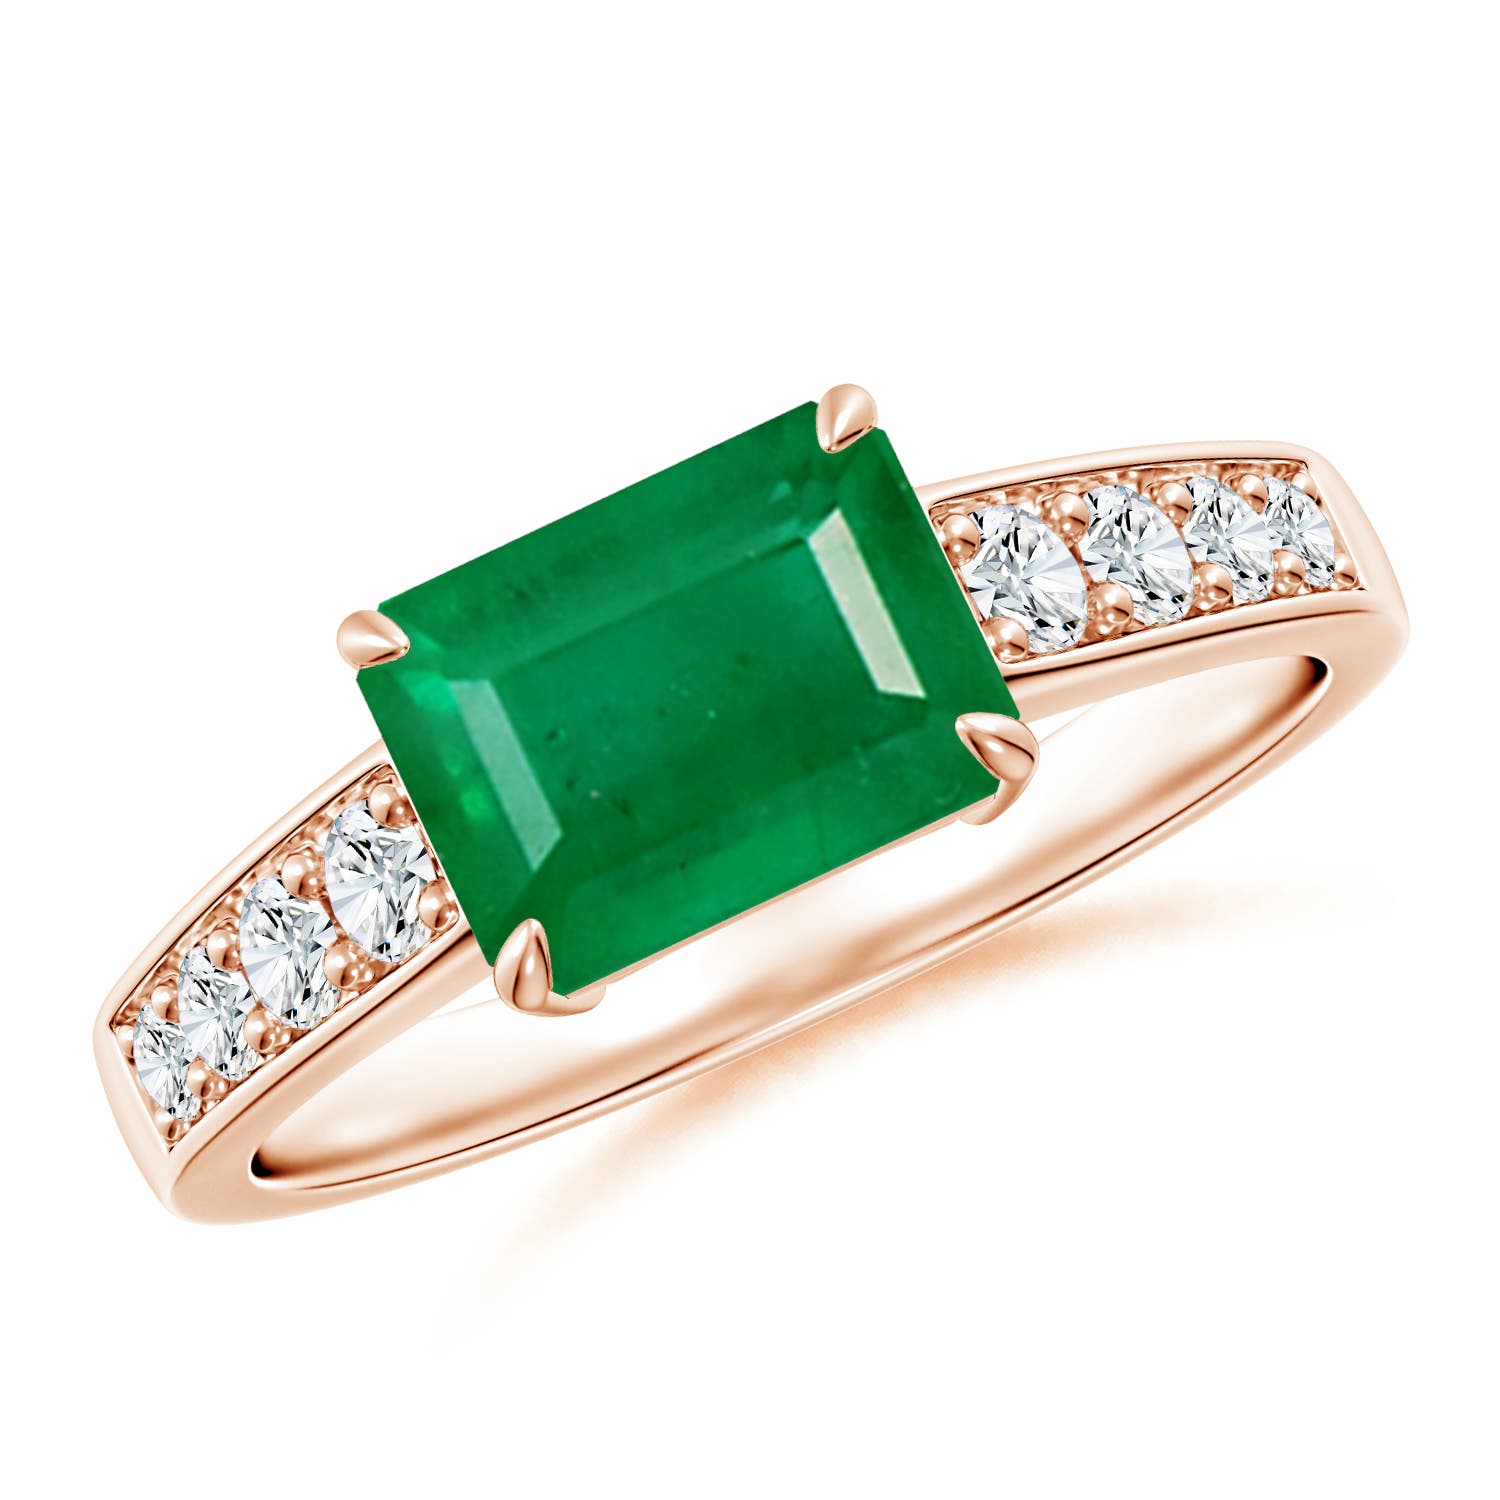 AA - Emerald / 1.82 CT / 14 KT Rose Gold